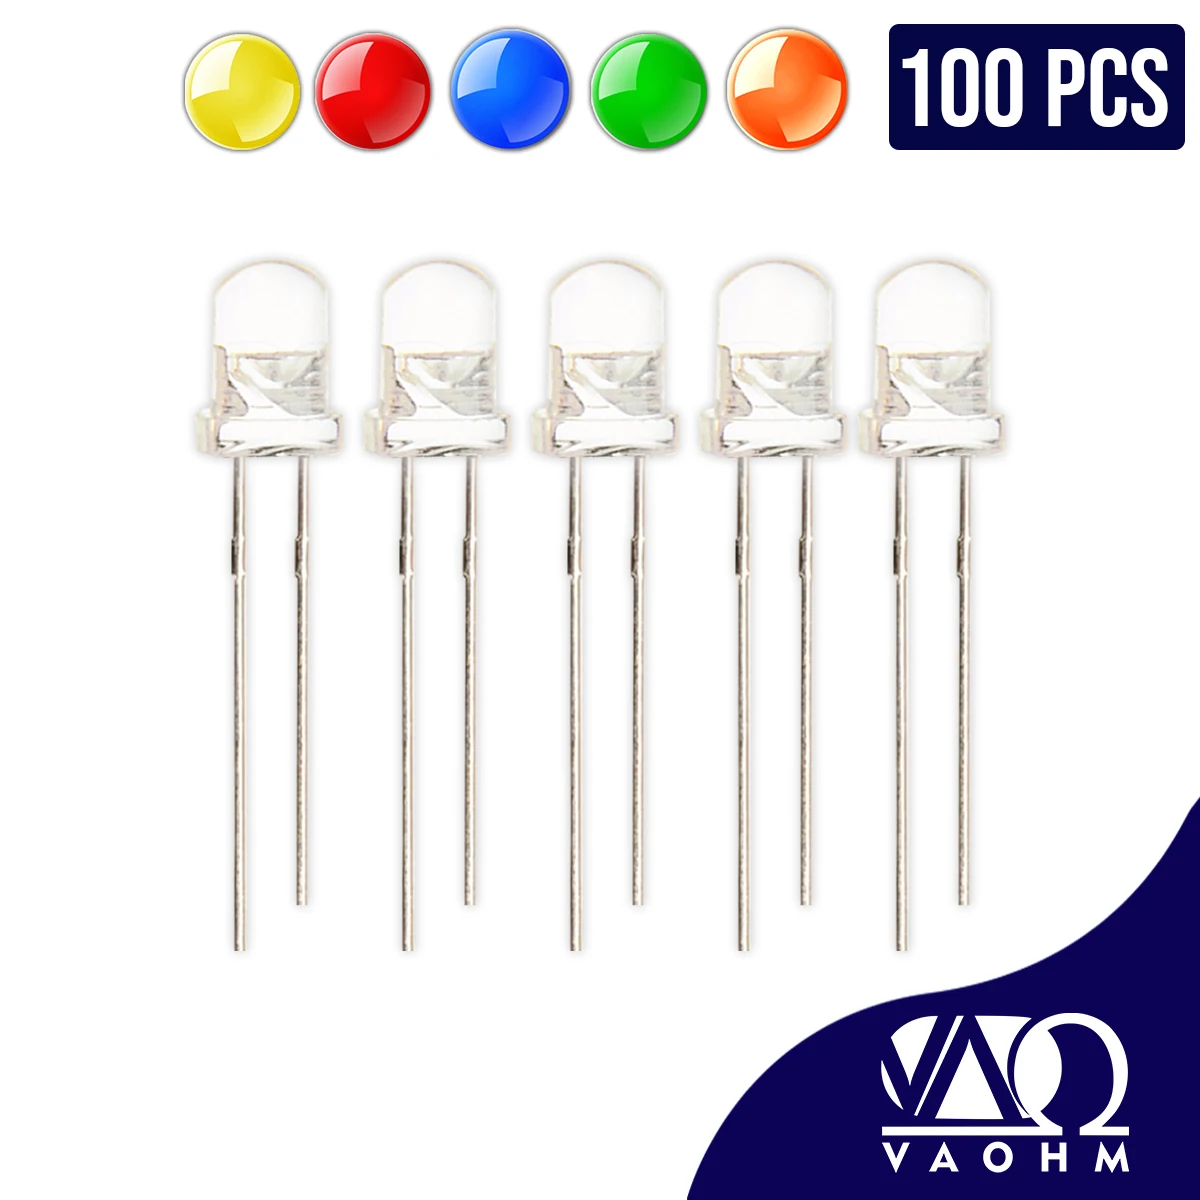 

10PCS LED F5 Water Clear Round 5mm Light Emitting Diode (RED/BLUE/GREEN/ORANGE/YELLOW/WHITE)